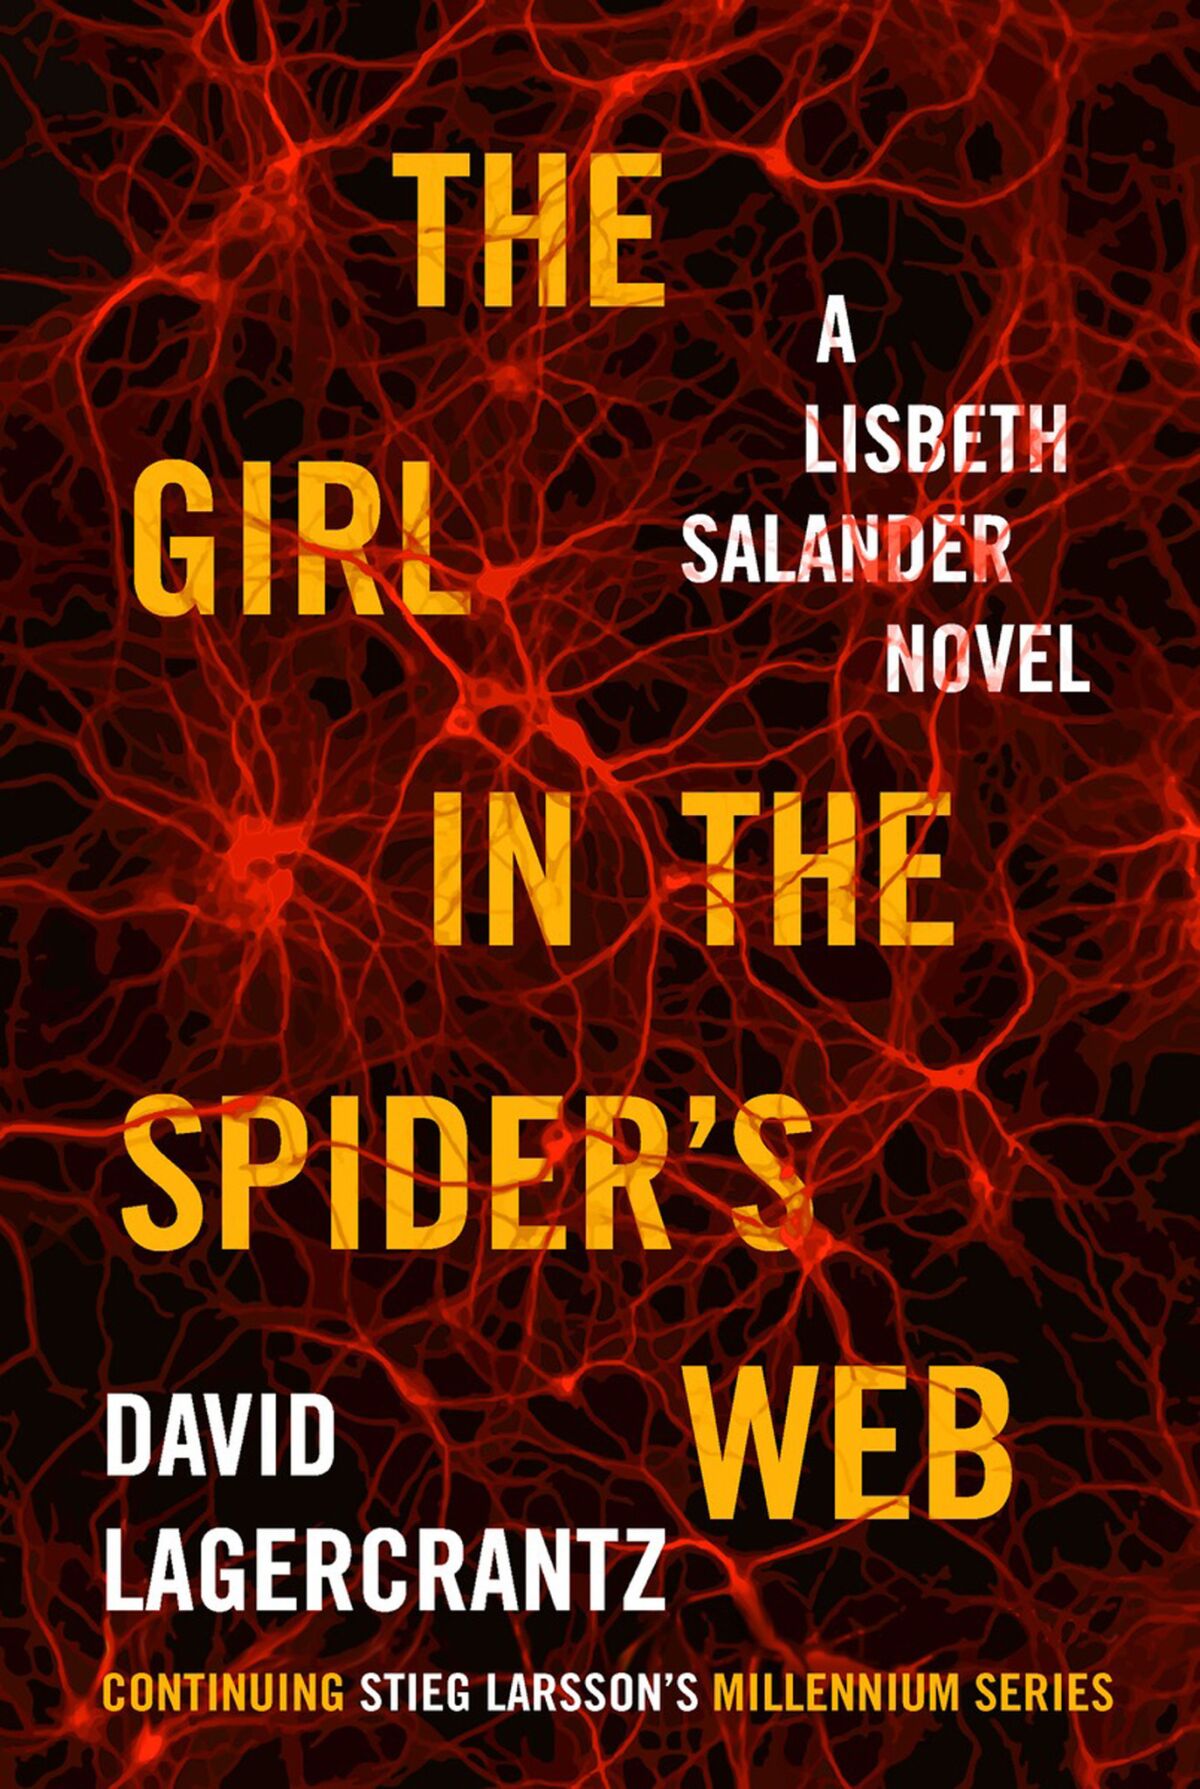 "The Girl in the Spider's Web" by David Lagercrantz.